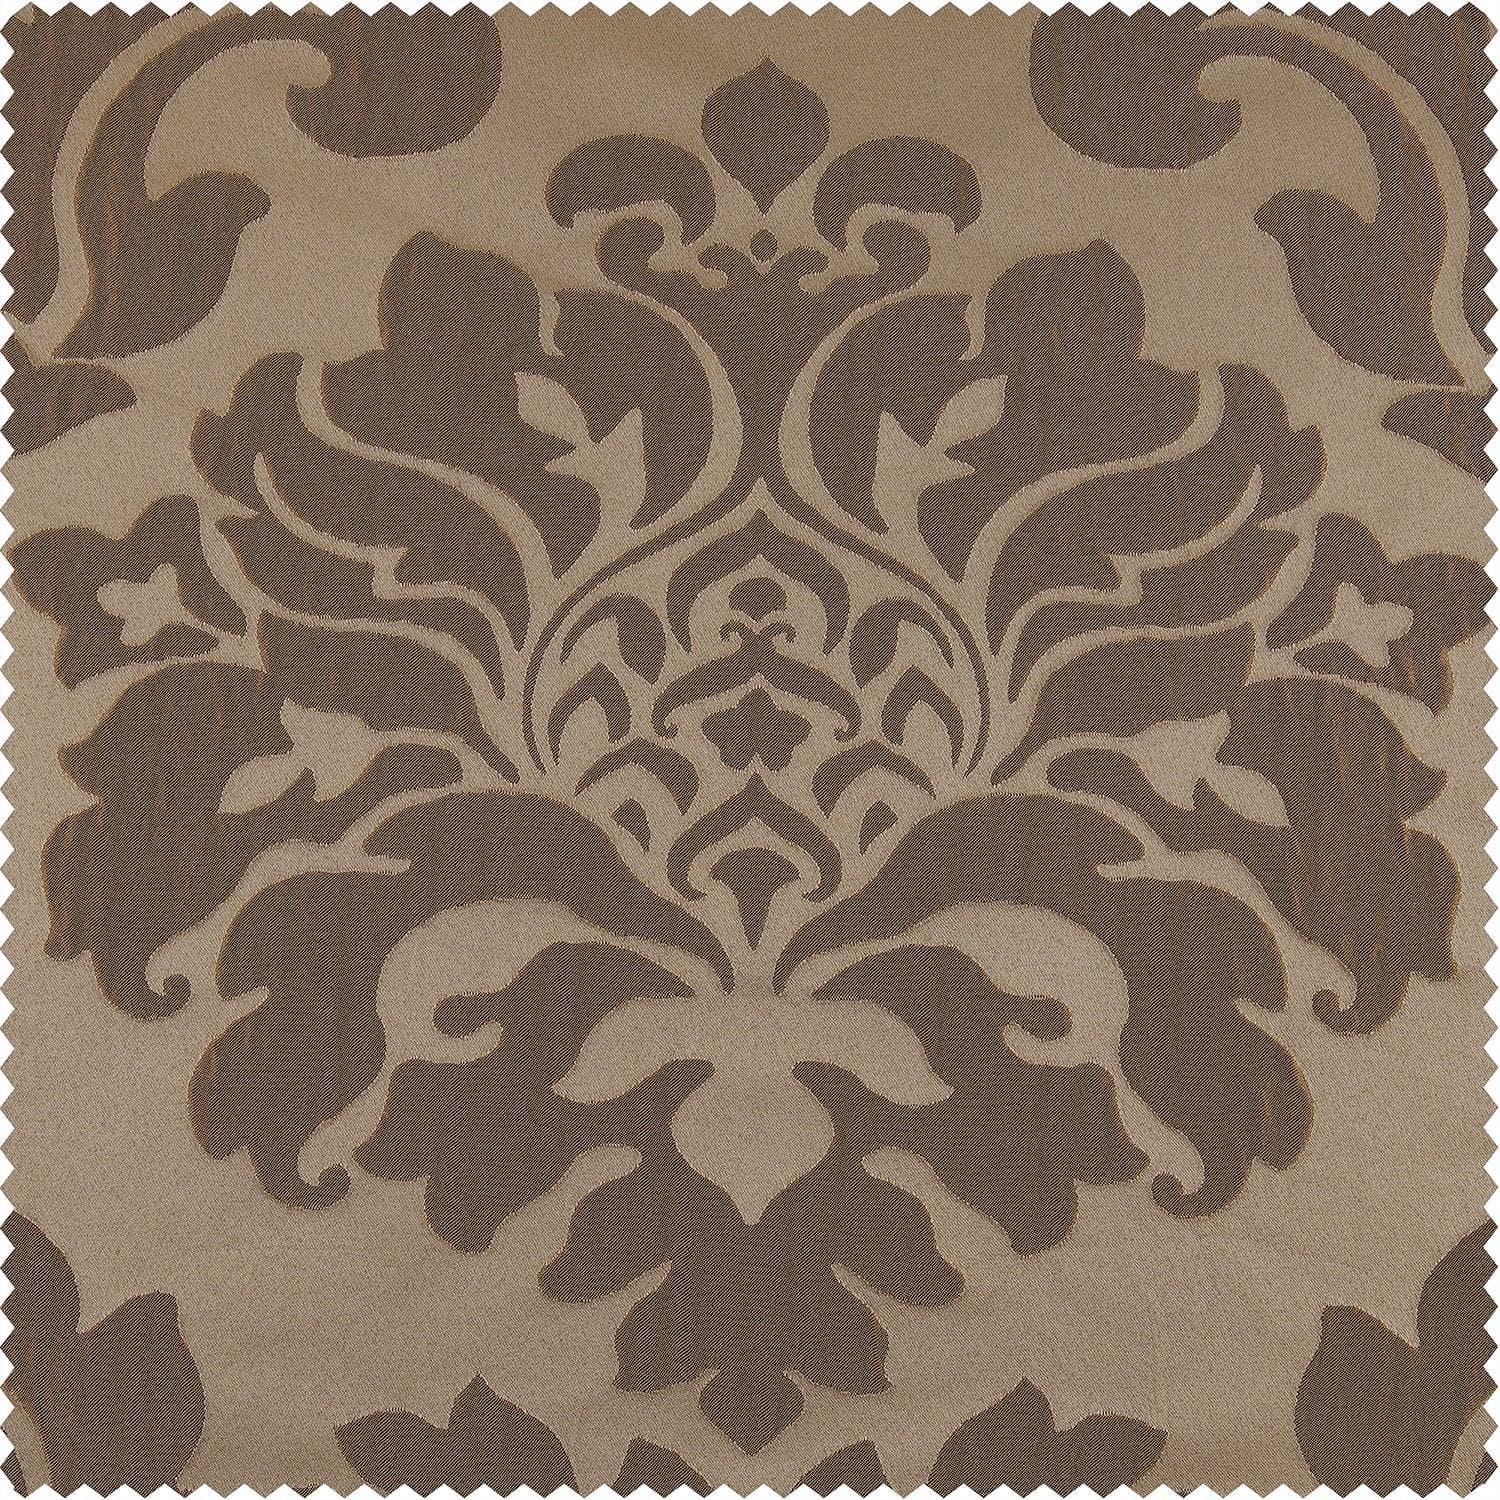 Taupe & Bronze French Pleat Faux Silk Jacquard Room Darkening Curtain